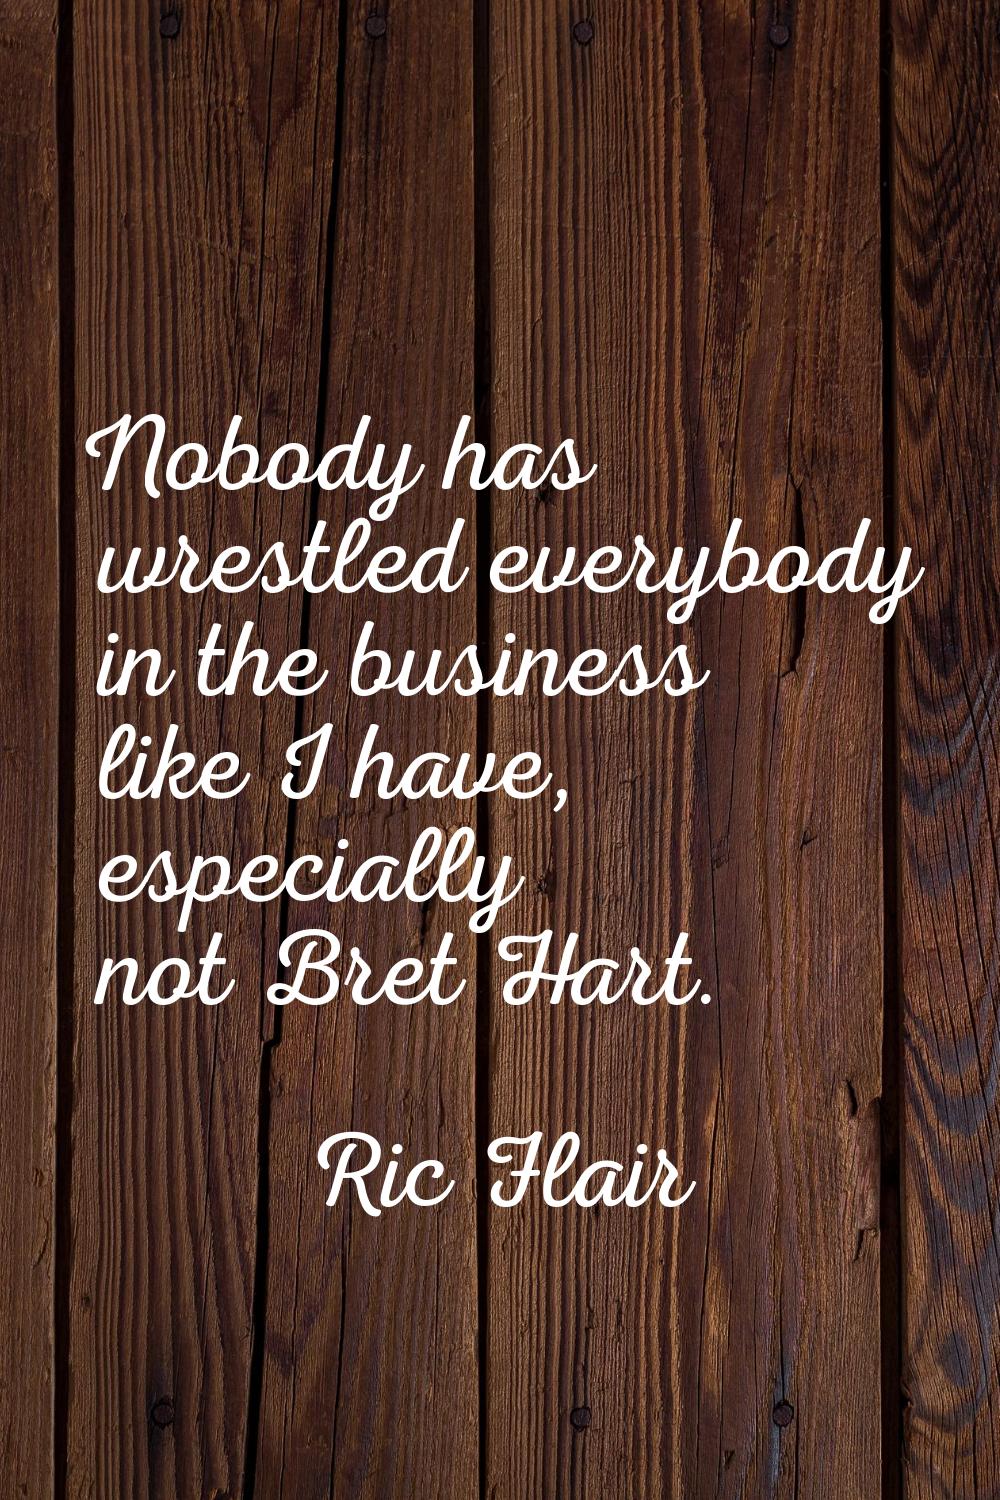 Nobody has wrestled everybody in the business like I have, especially not Bret Hart.